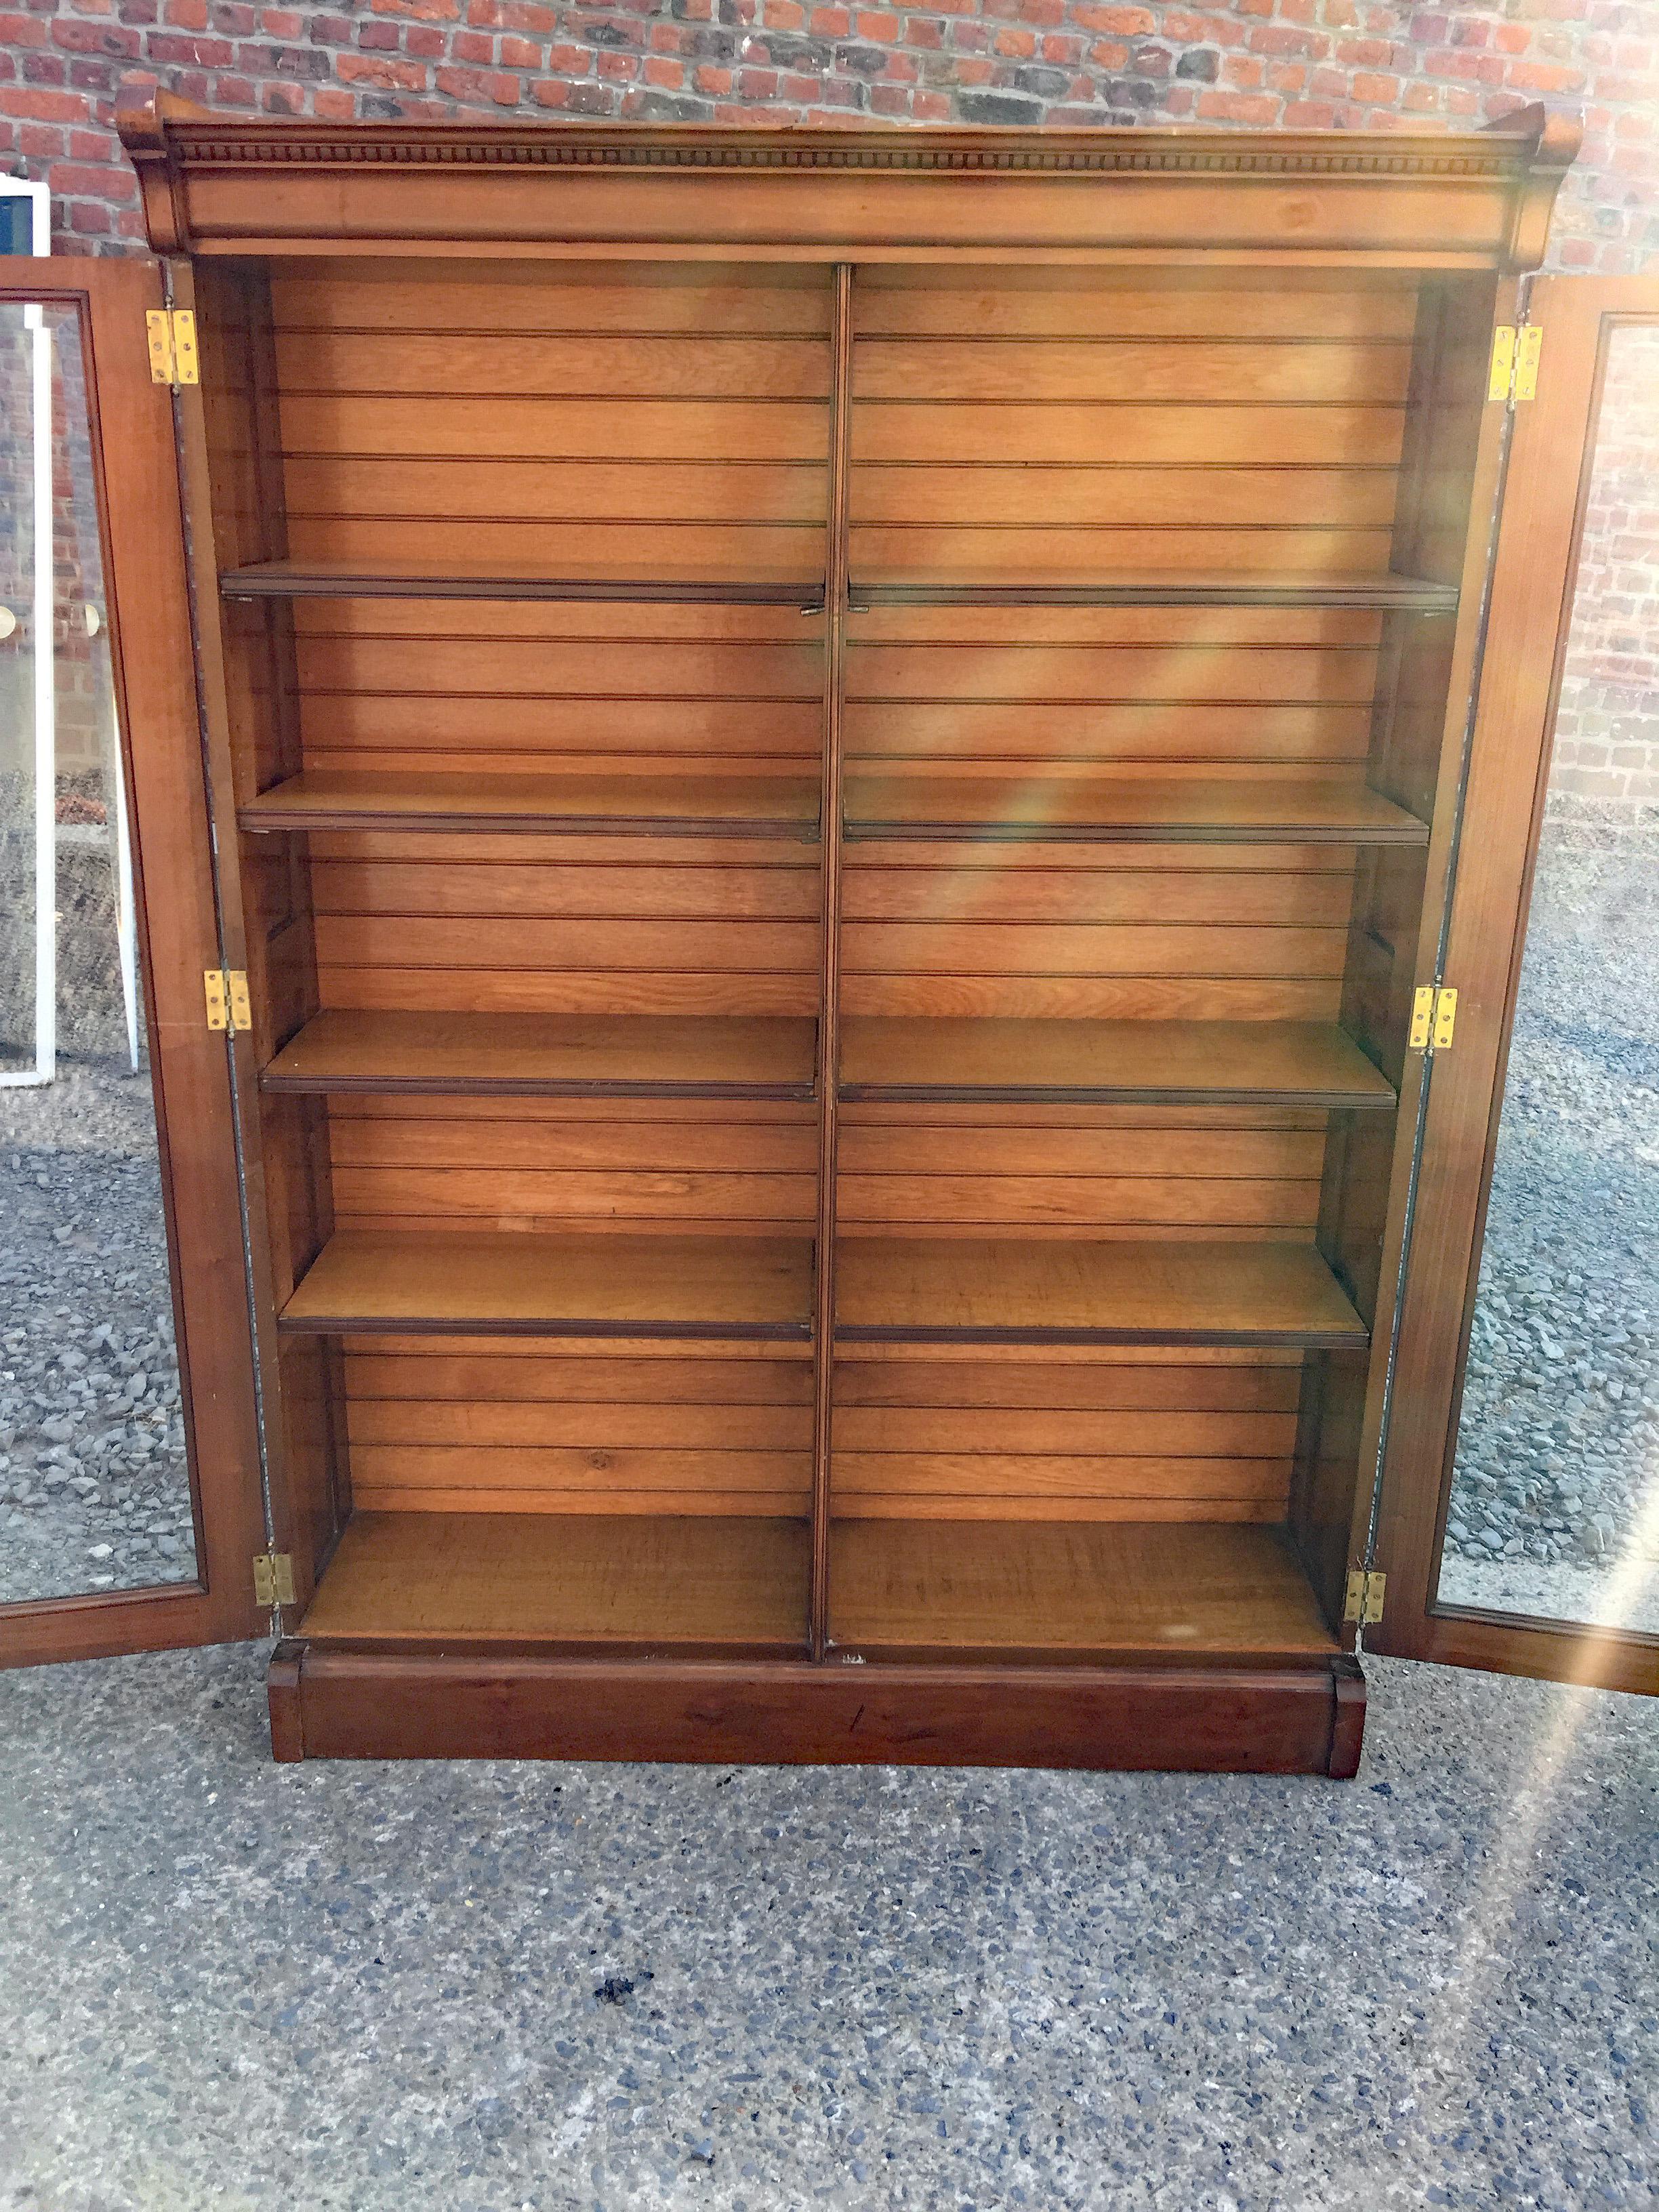 Storage Unit or Library in American Walnut, circa 1900 For Sale 7